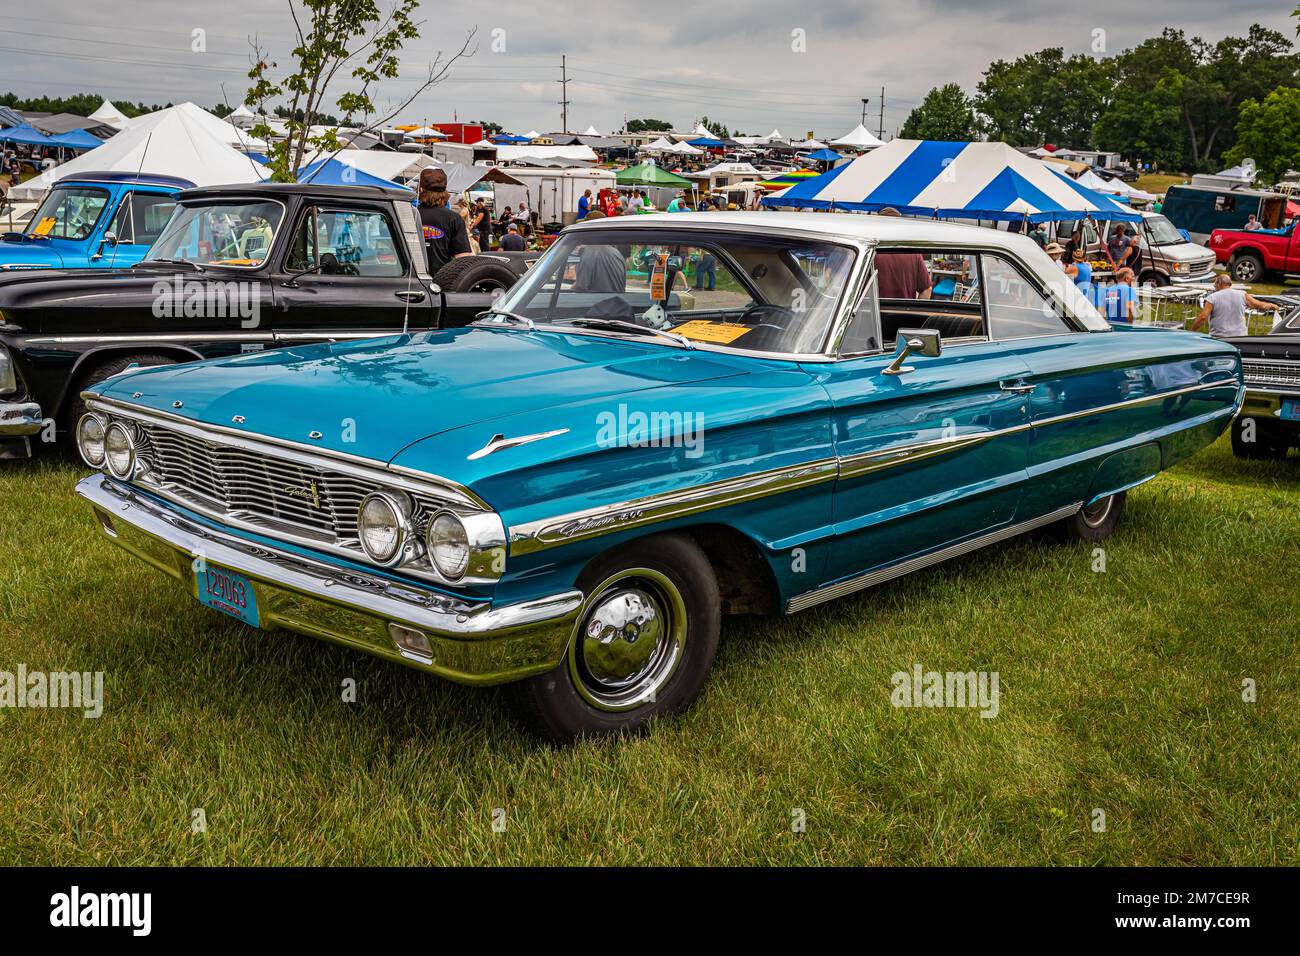 Iola, WI - July 07, 2022: High perspective front corner view of a 1964 Ford Galaxie 500 2 Door Hardtop at a local car show. Stock Photo